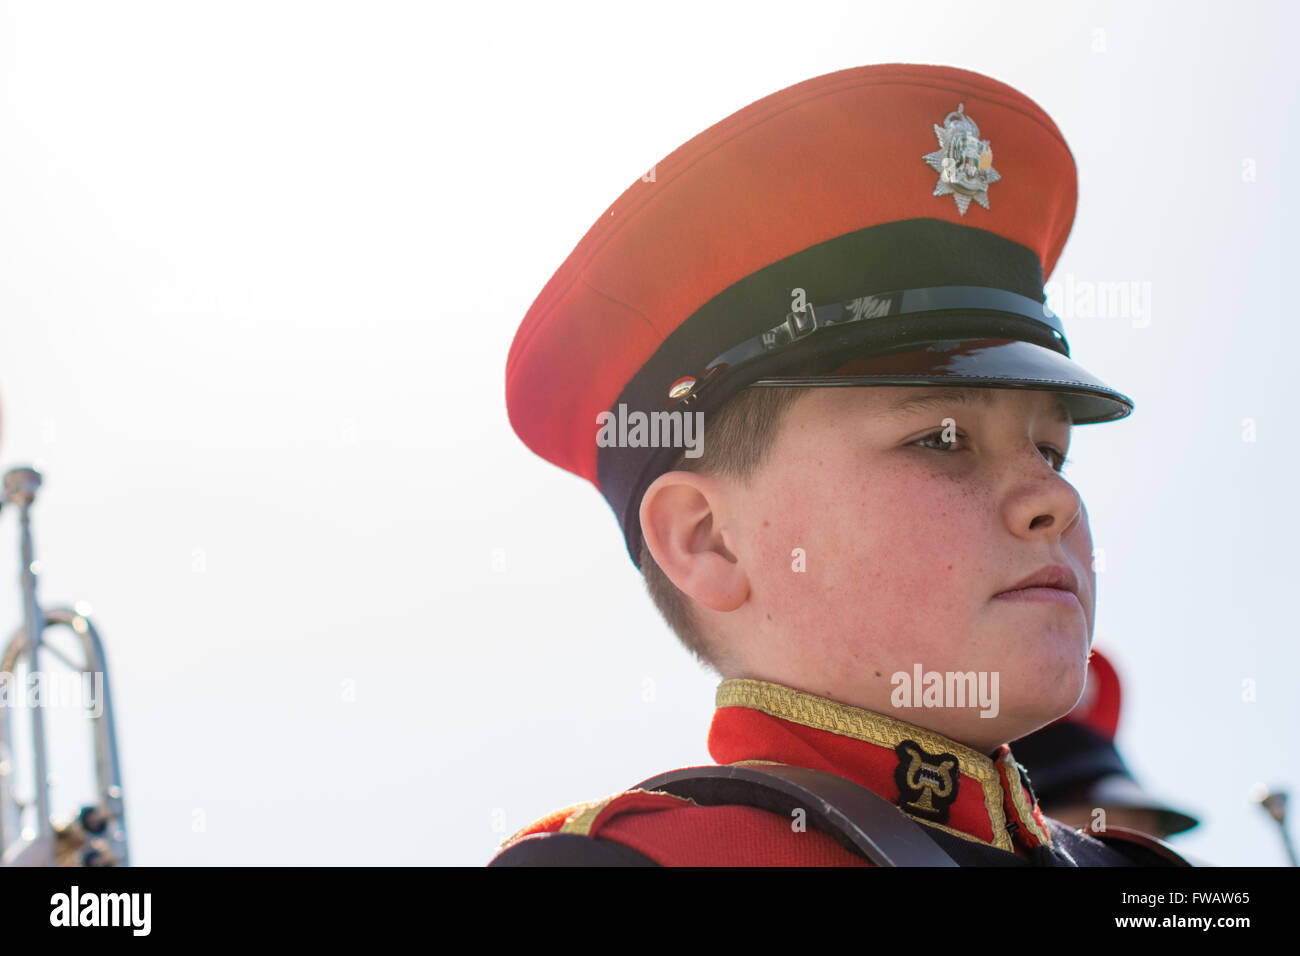 Towcester, Northamptonshire, UK. 2nd April, 2016. Coventry Marching band member during previews for Hankook 24 Hours Touring Car Series at Silverstone Circuit (Photo by Gergo Toth / Alamy Live News) Stock Photo